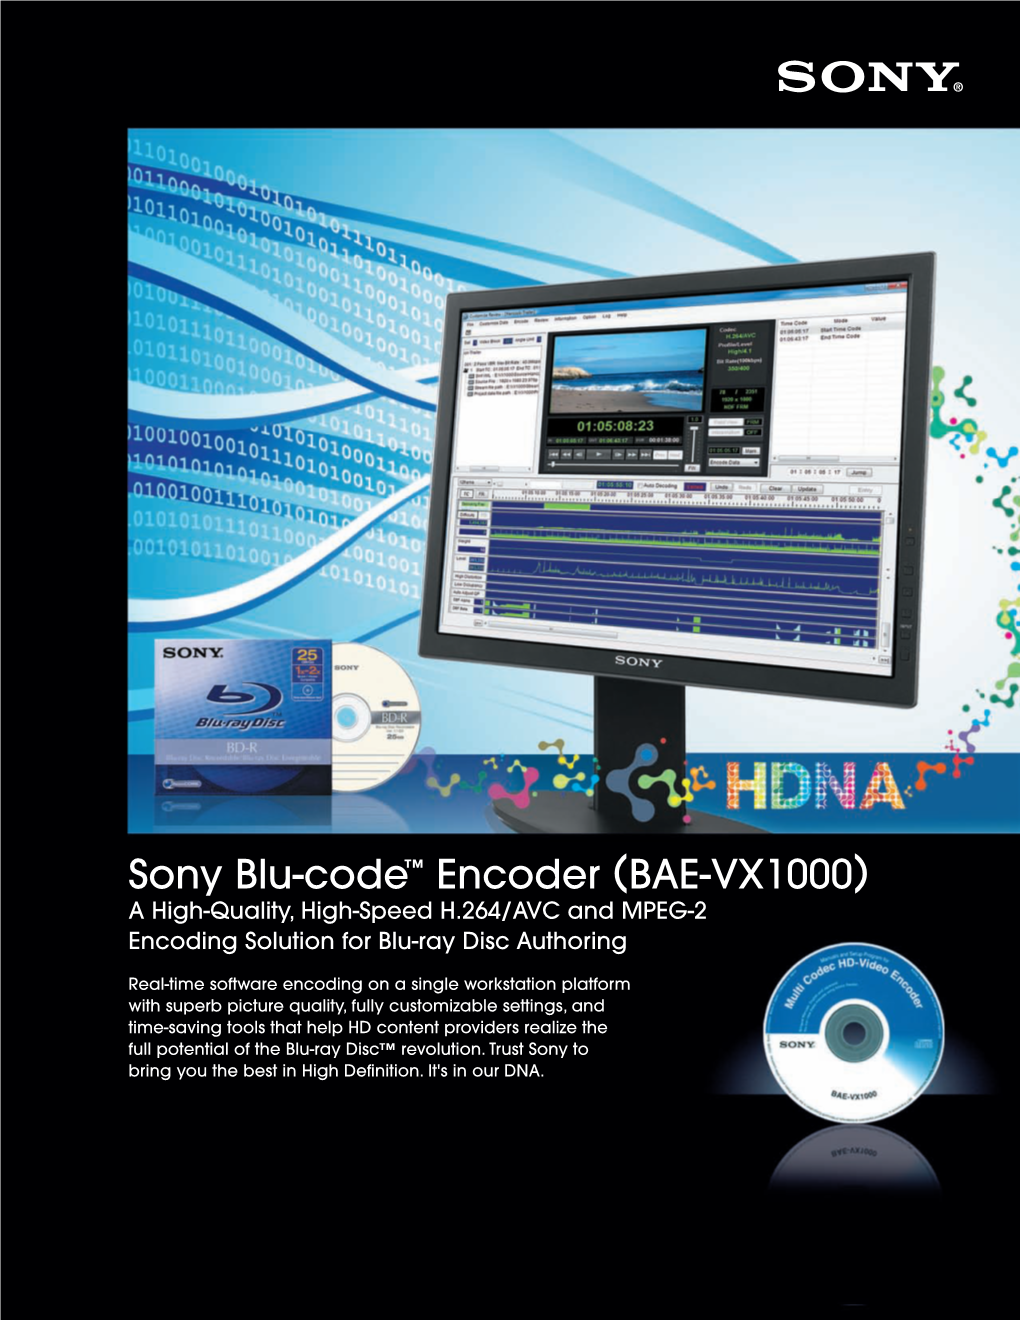 Sony Blu-Code™ Encoder (BAE-VX1000) a High-Quality, High-Speed H.264/AVC and MPEG-2 Encoding Solution for Blu-Ray Disc Authoring